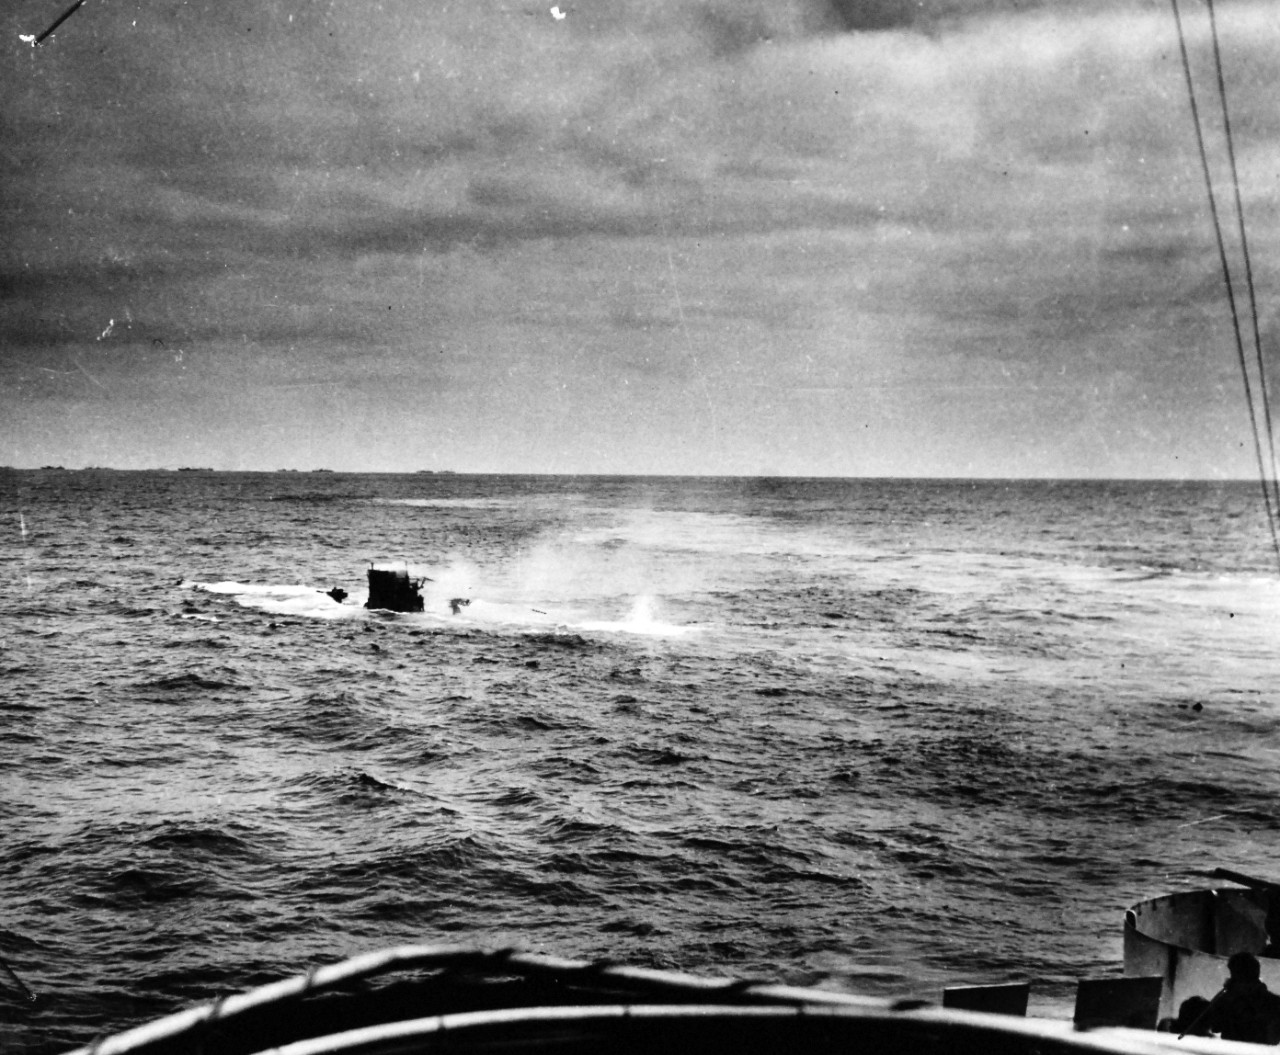 26-G-1518:  Sinking of German submarine U-175, April 1943.   The submarine was sunk off south-west of Ireland by USCGC Spencer (WPG-36) on April 17, 1943.    Official U.S. Coast Guard Photograph, now in the collections of the National Archives.  (2017/09/05).